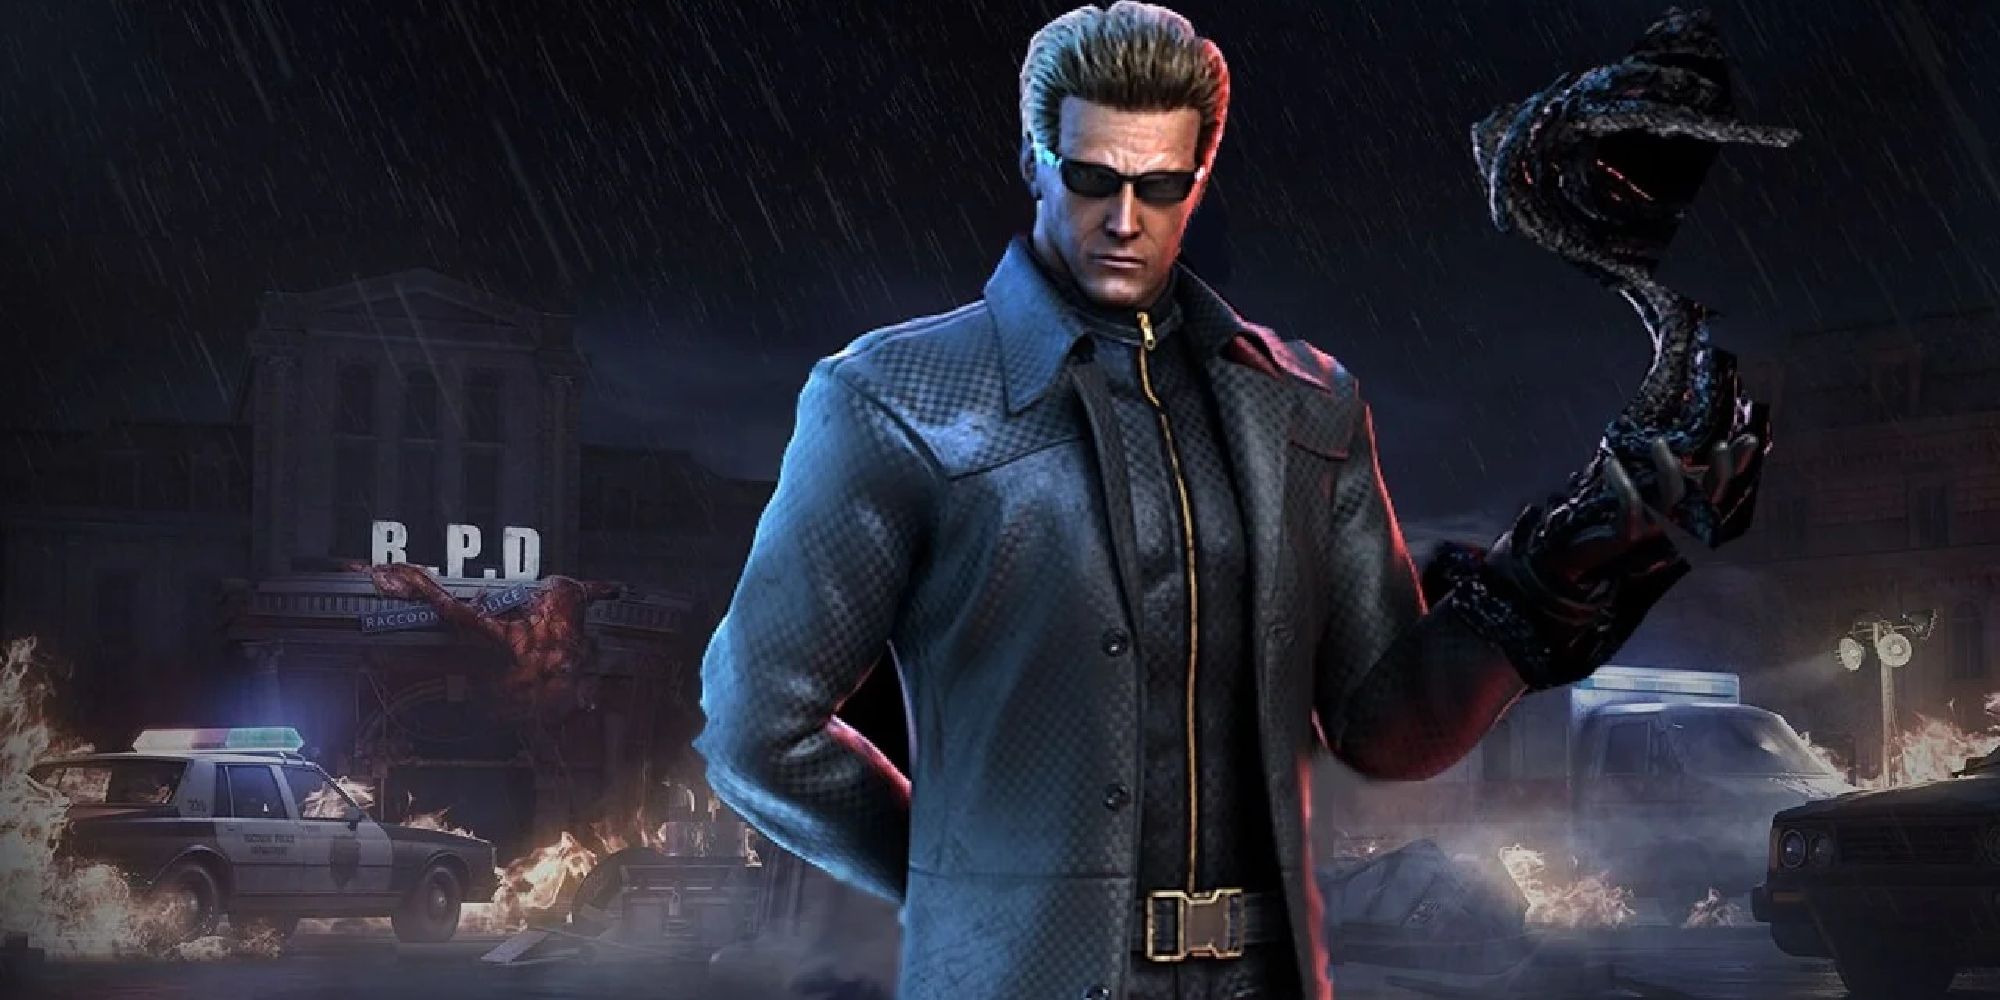 Albert Wesker as featured in the Project W DLC, one hand behind his back, the other summoning ouroborus tentacles 